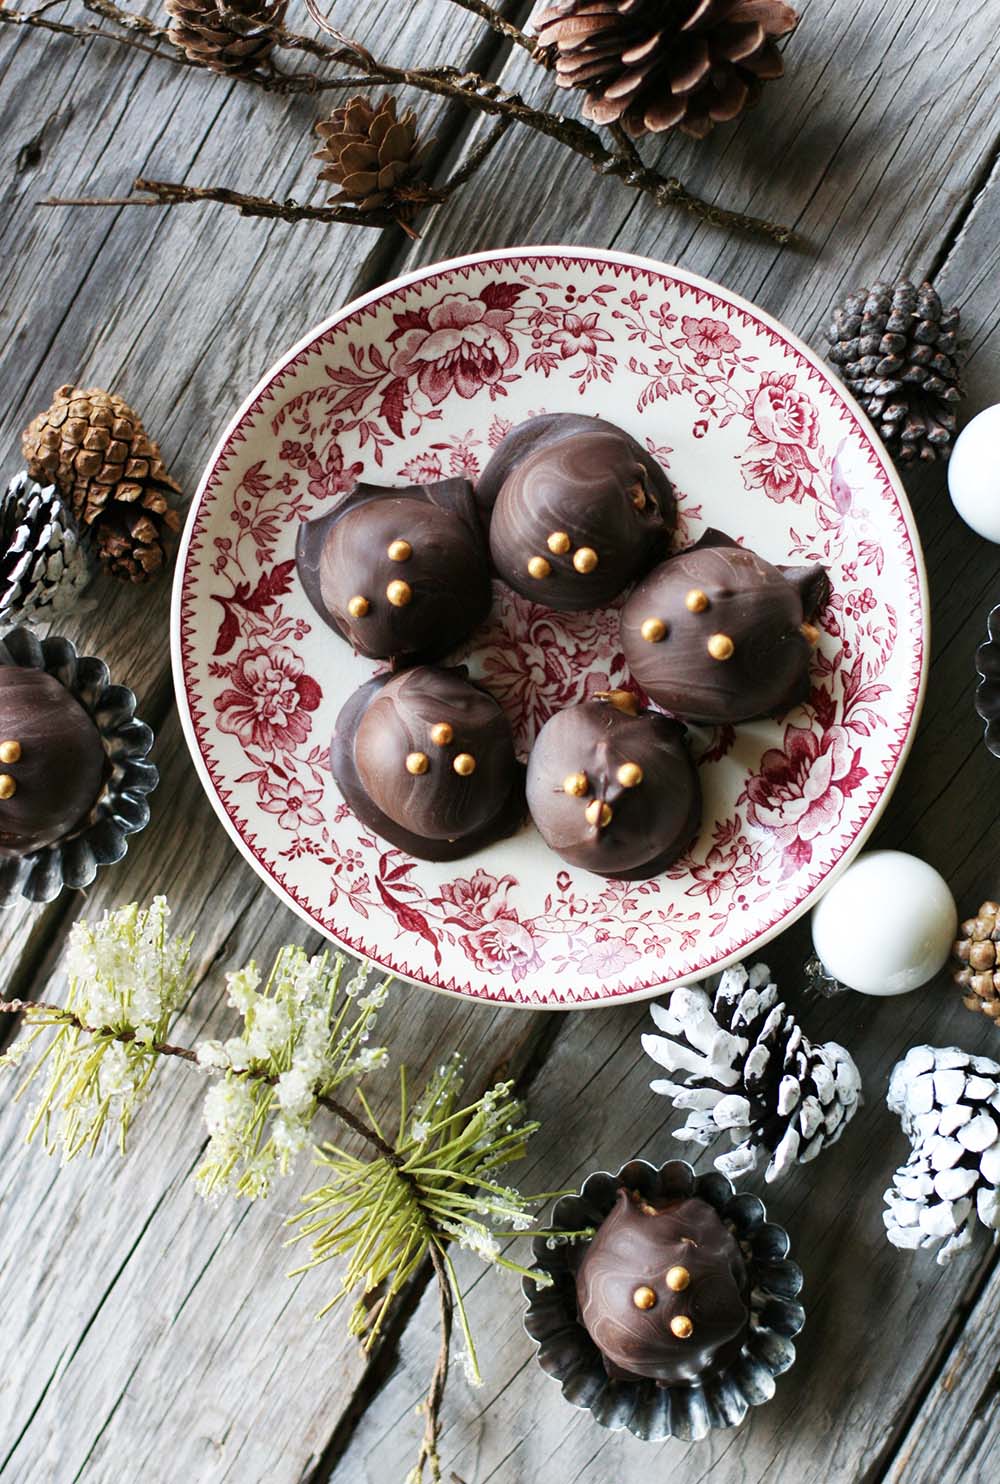 Learn how to make cookie butter truffles, perfect for your Holiday sweets tray